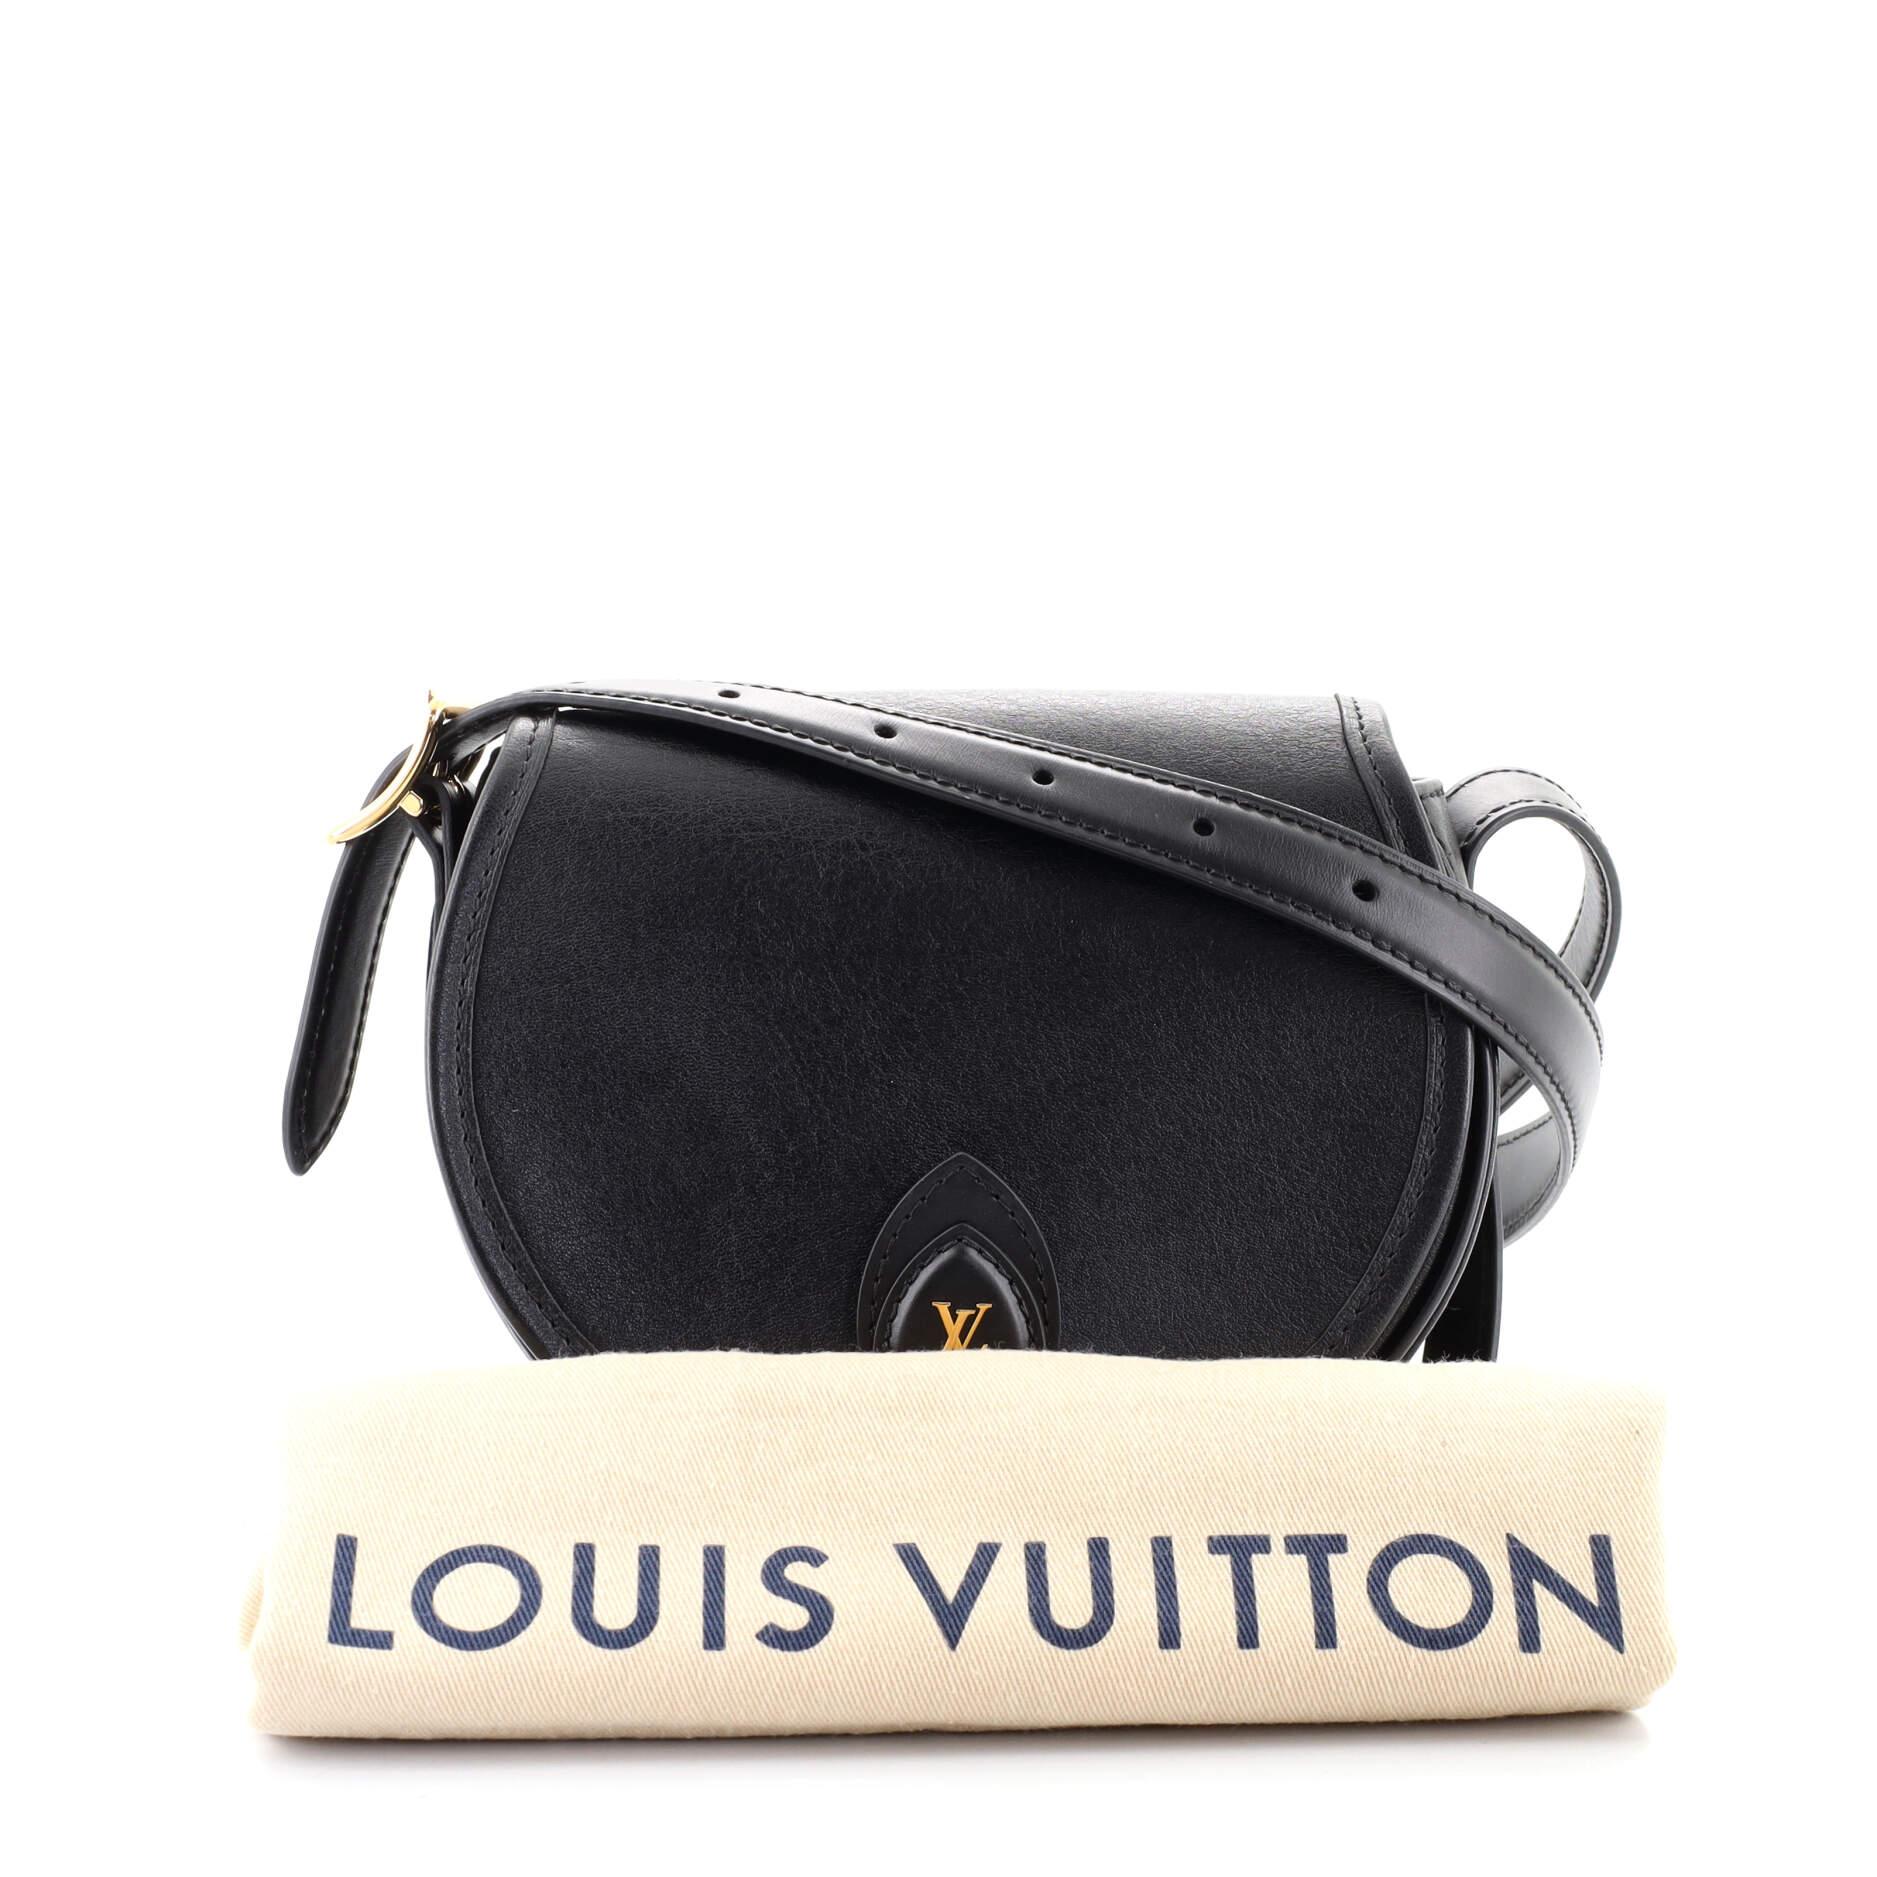 Louis Vuitton Tambourin - For Sale on 1stDibs | tambourine louis vuitton,  louis vuitton tambourine bag, lv tambourin bag